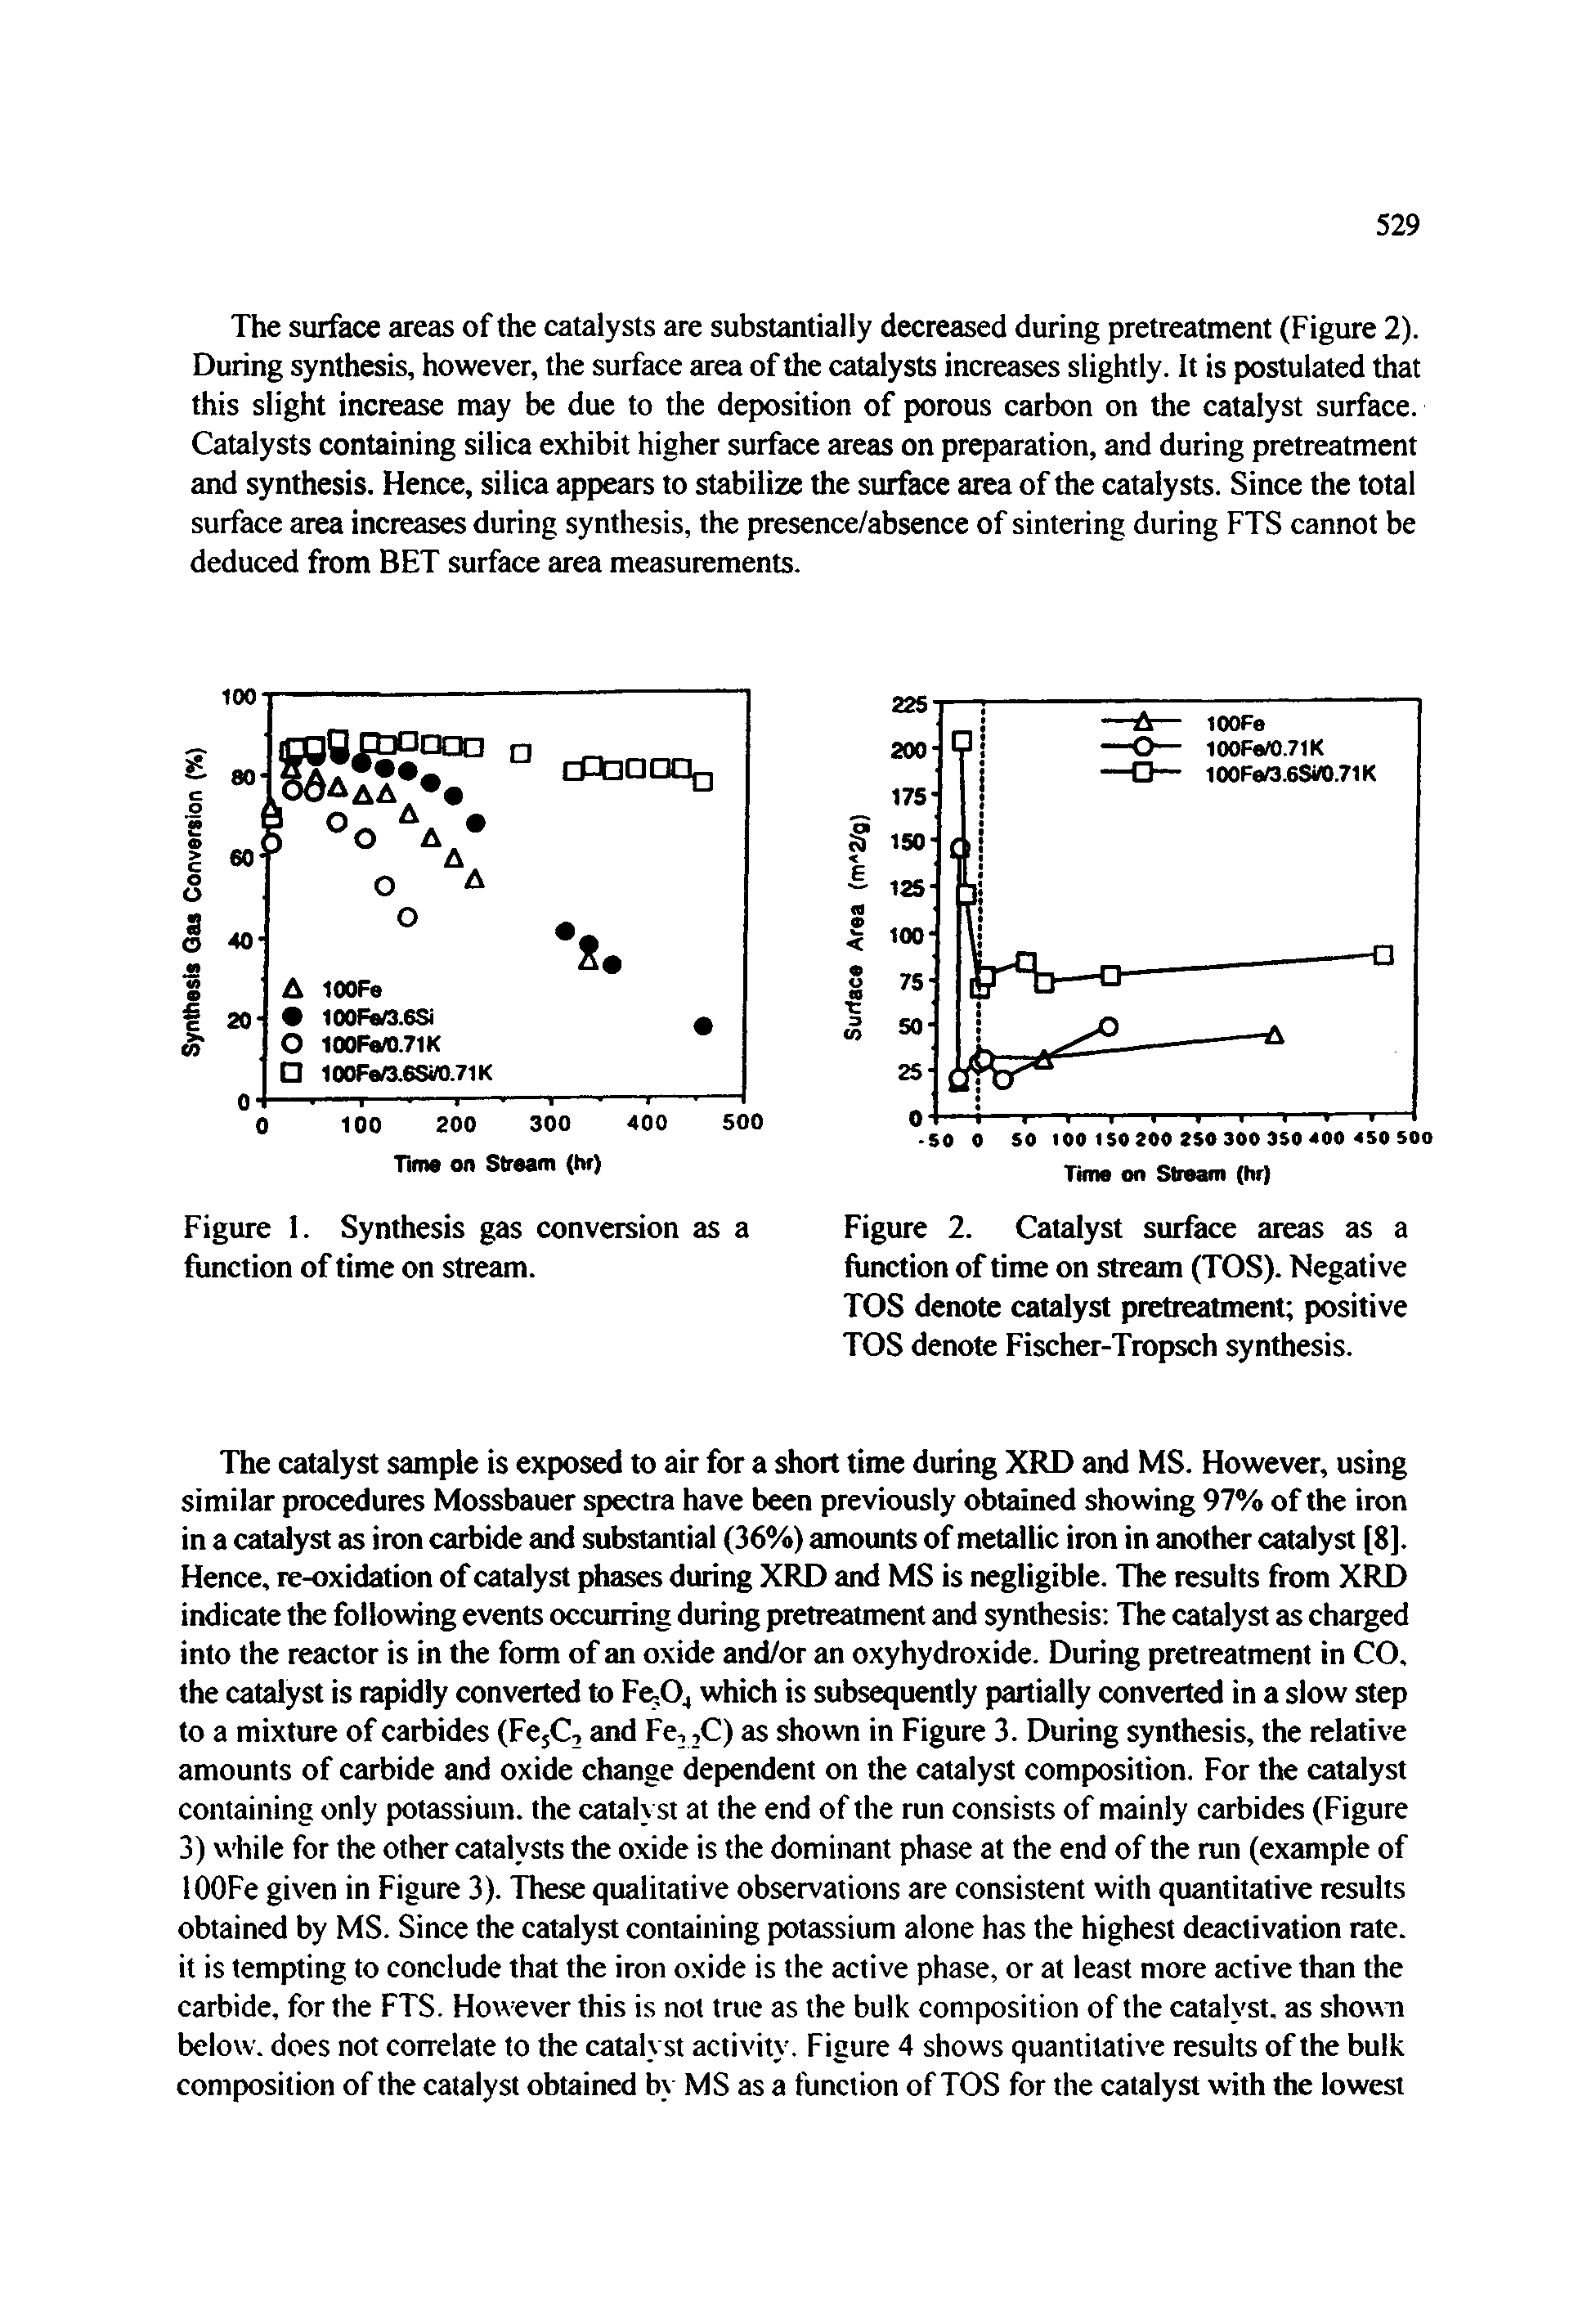 Figure 2. Catalyst surface areas as a function of time on stream (TOS). Negative TOS denote catalyst pretreatment positive TOS denote Fischer-Tropsch synthesis.